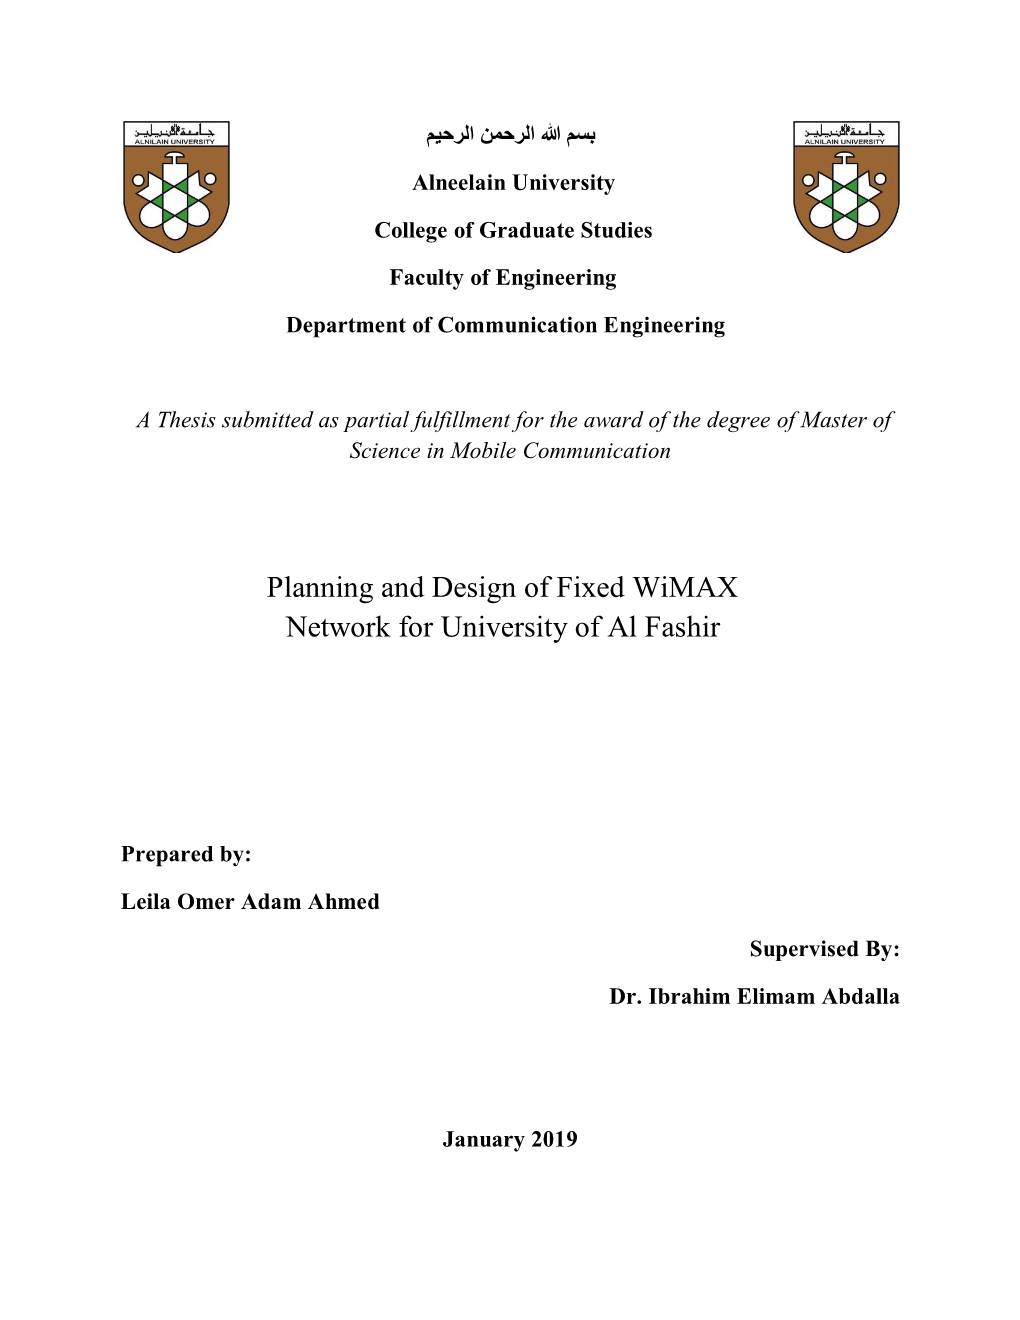 Planning and Design of Fixed Wimax Network for University of Al Fashir